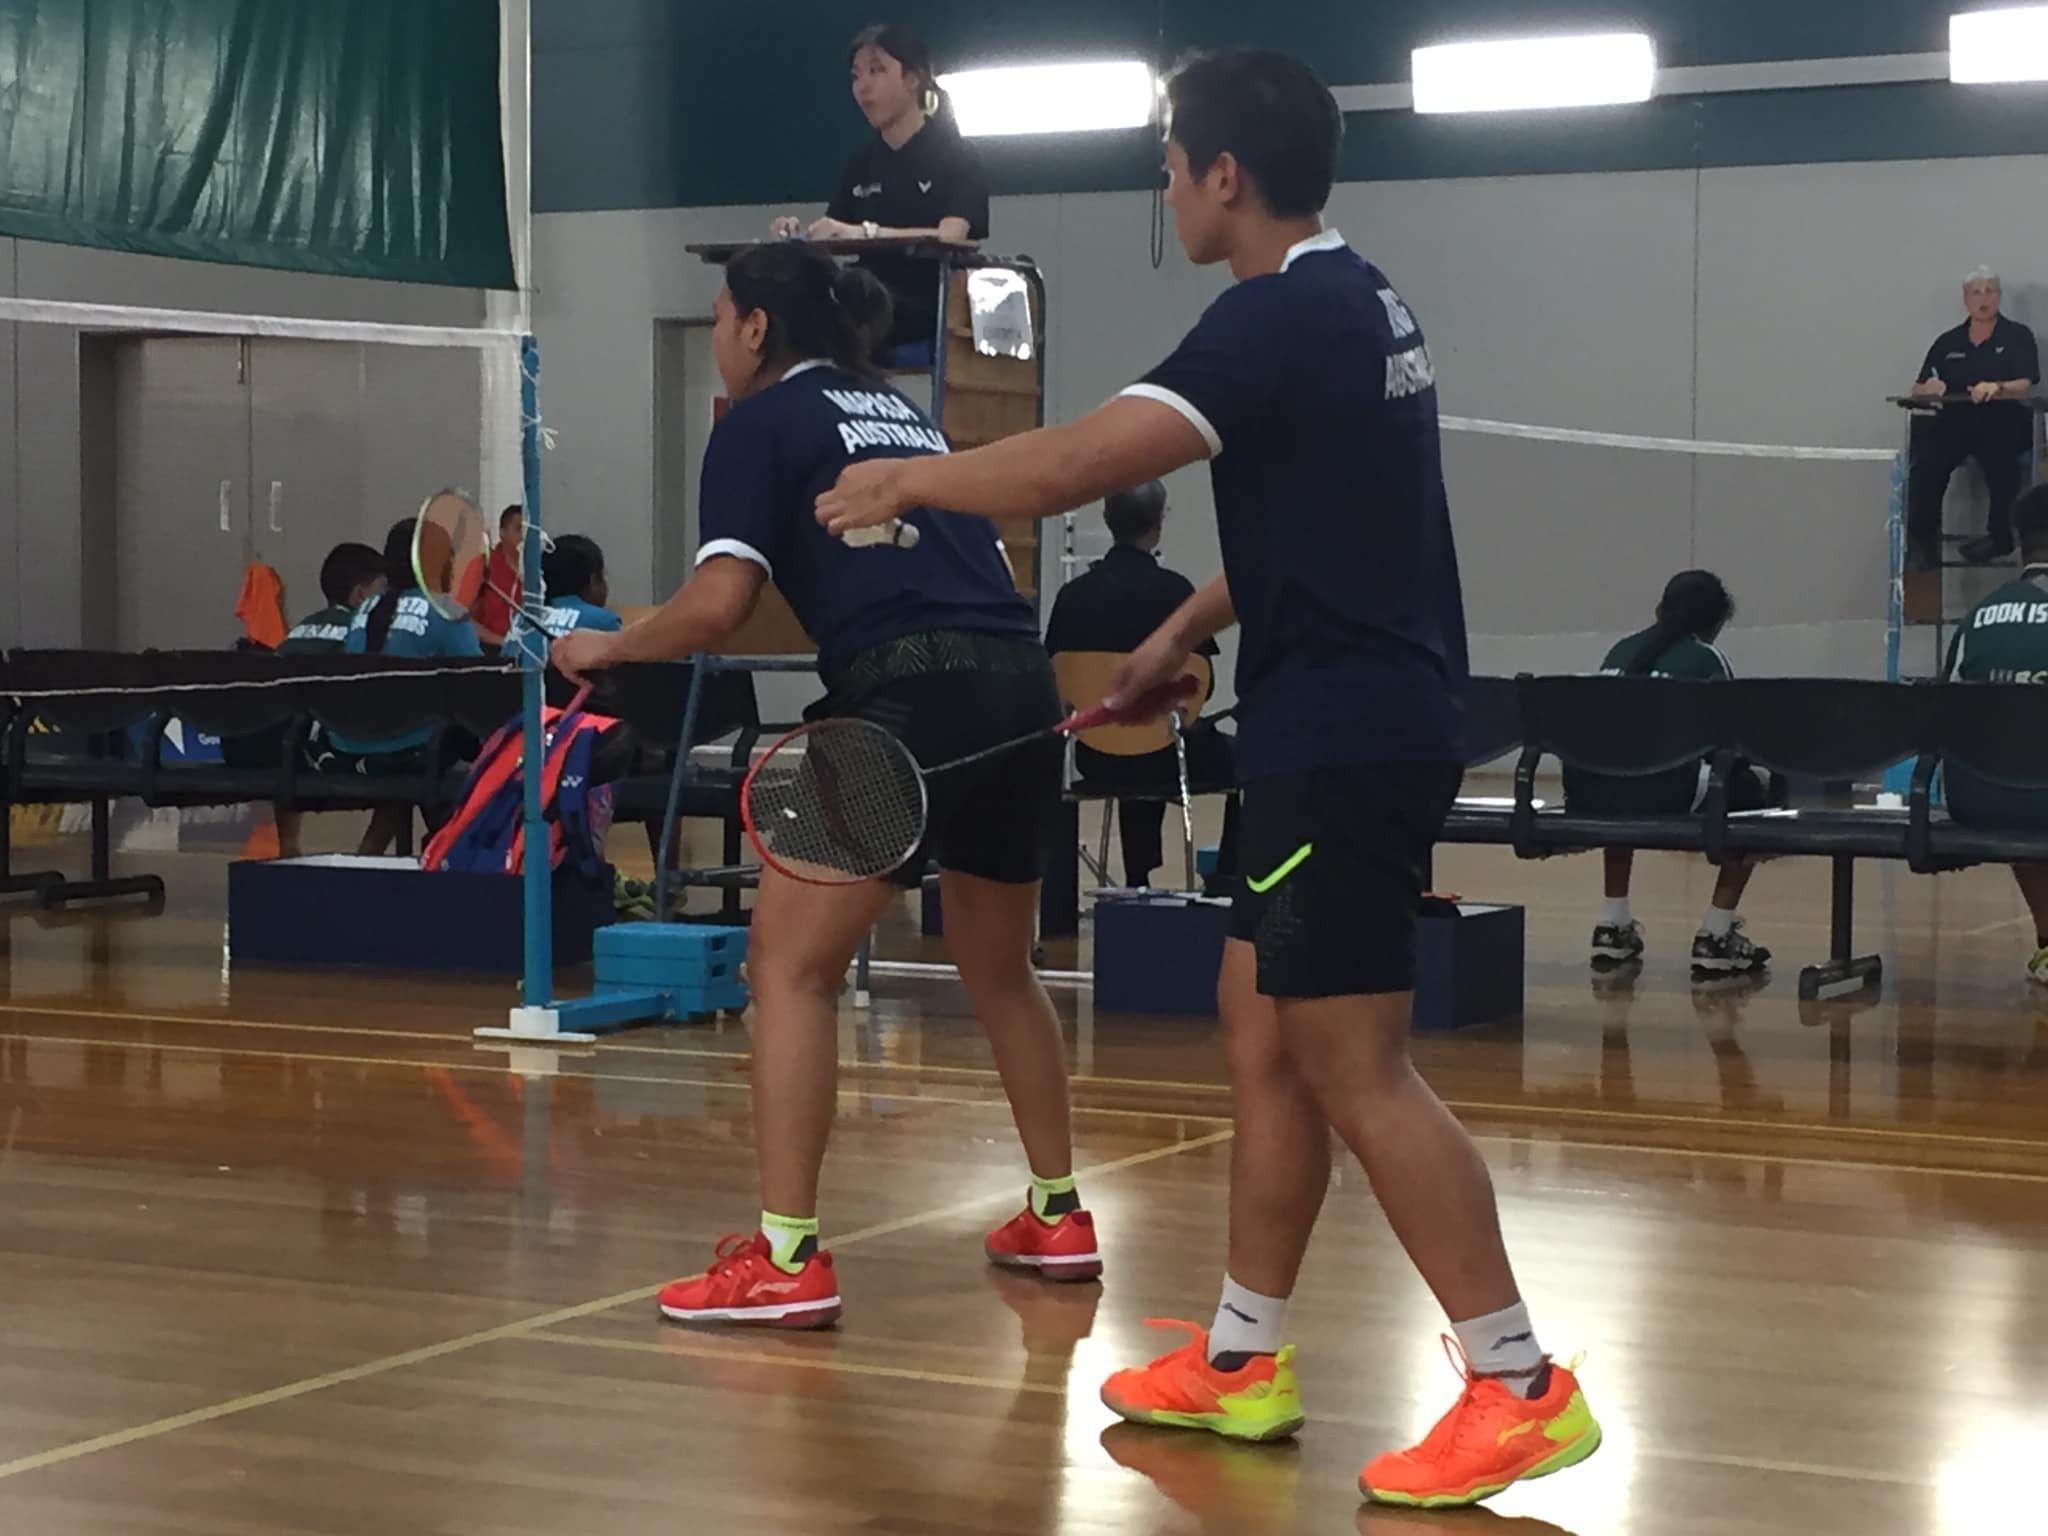 Australia dominate in front of home crowd at Oceania Mixed Team Badminton Championships